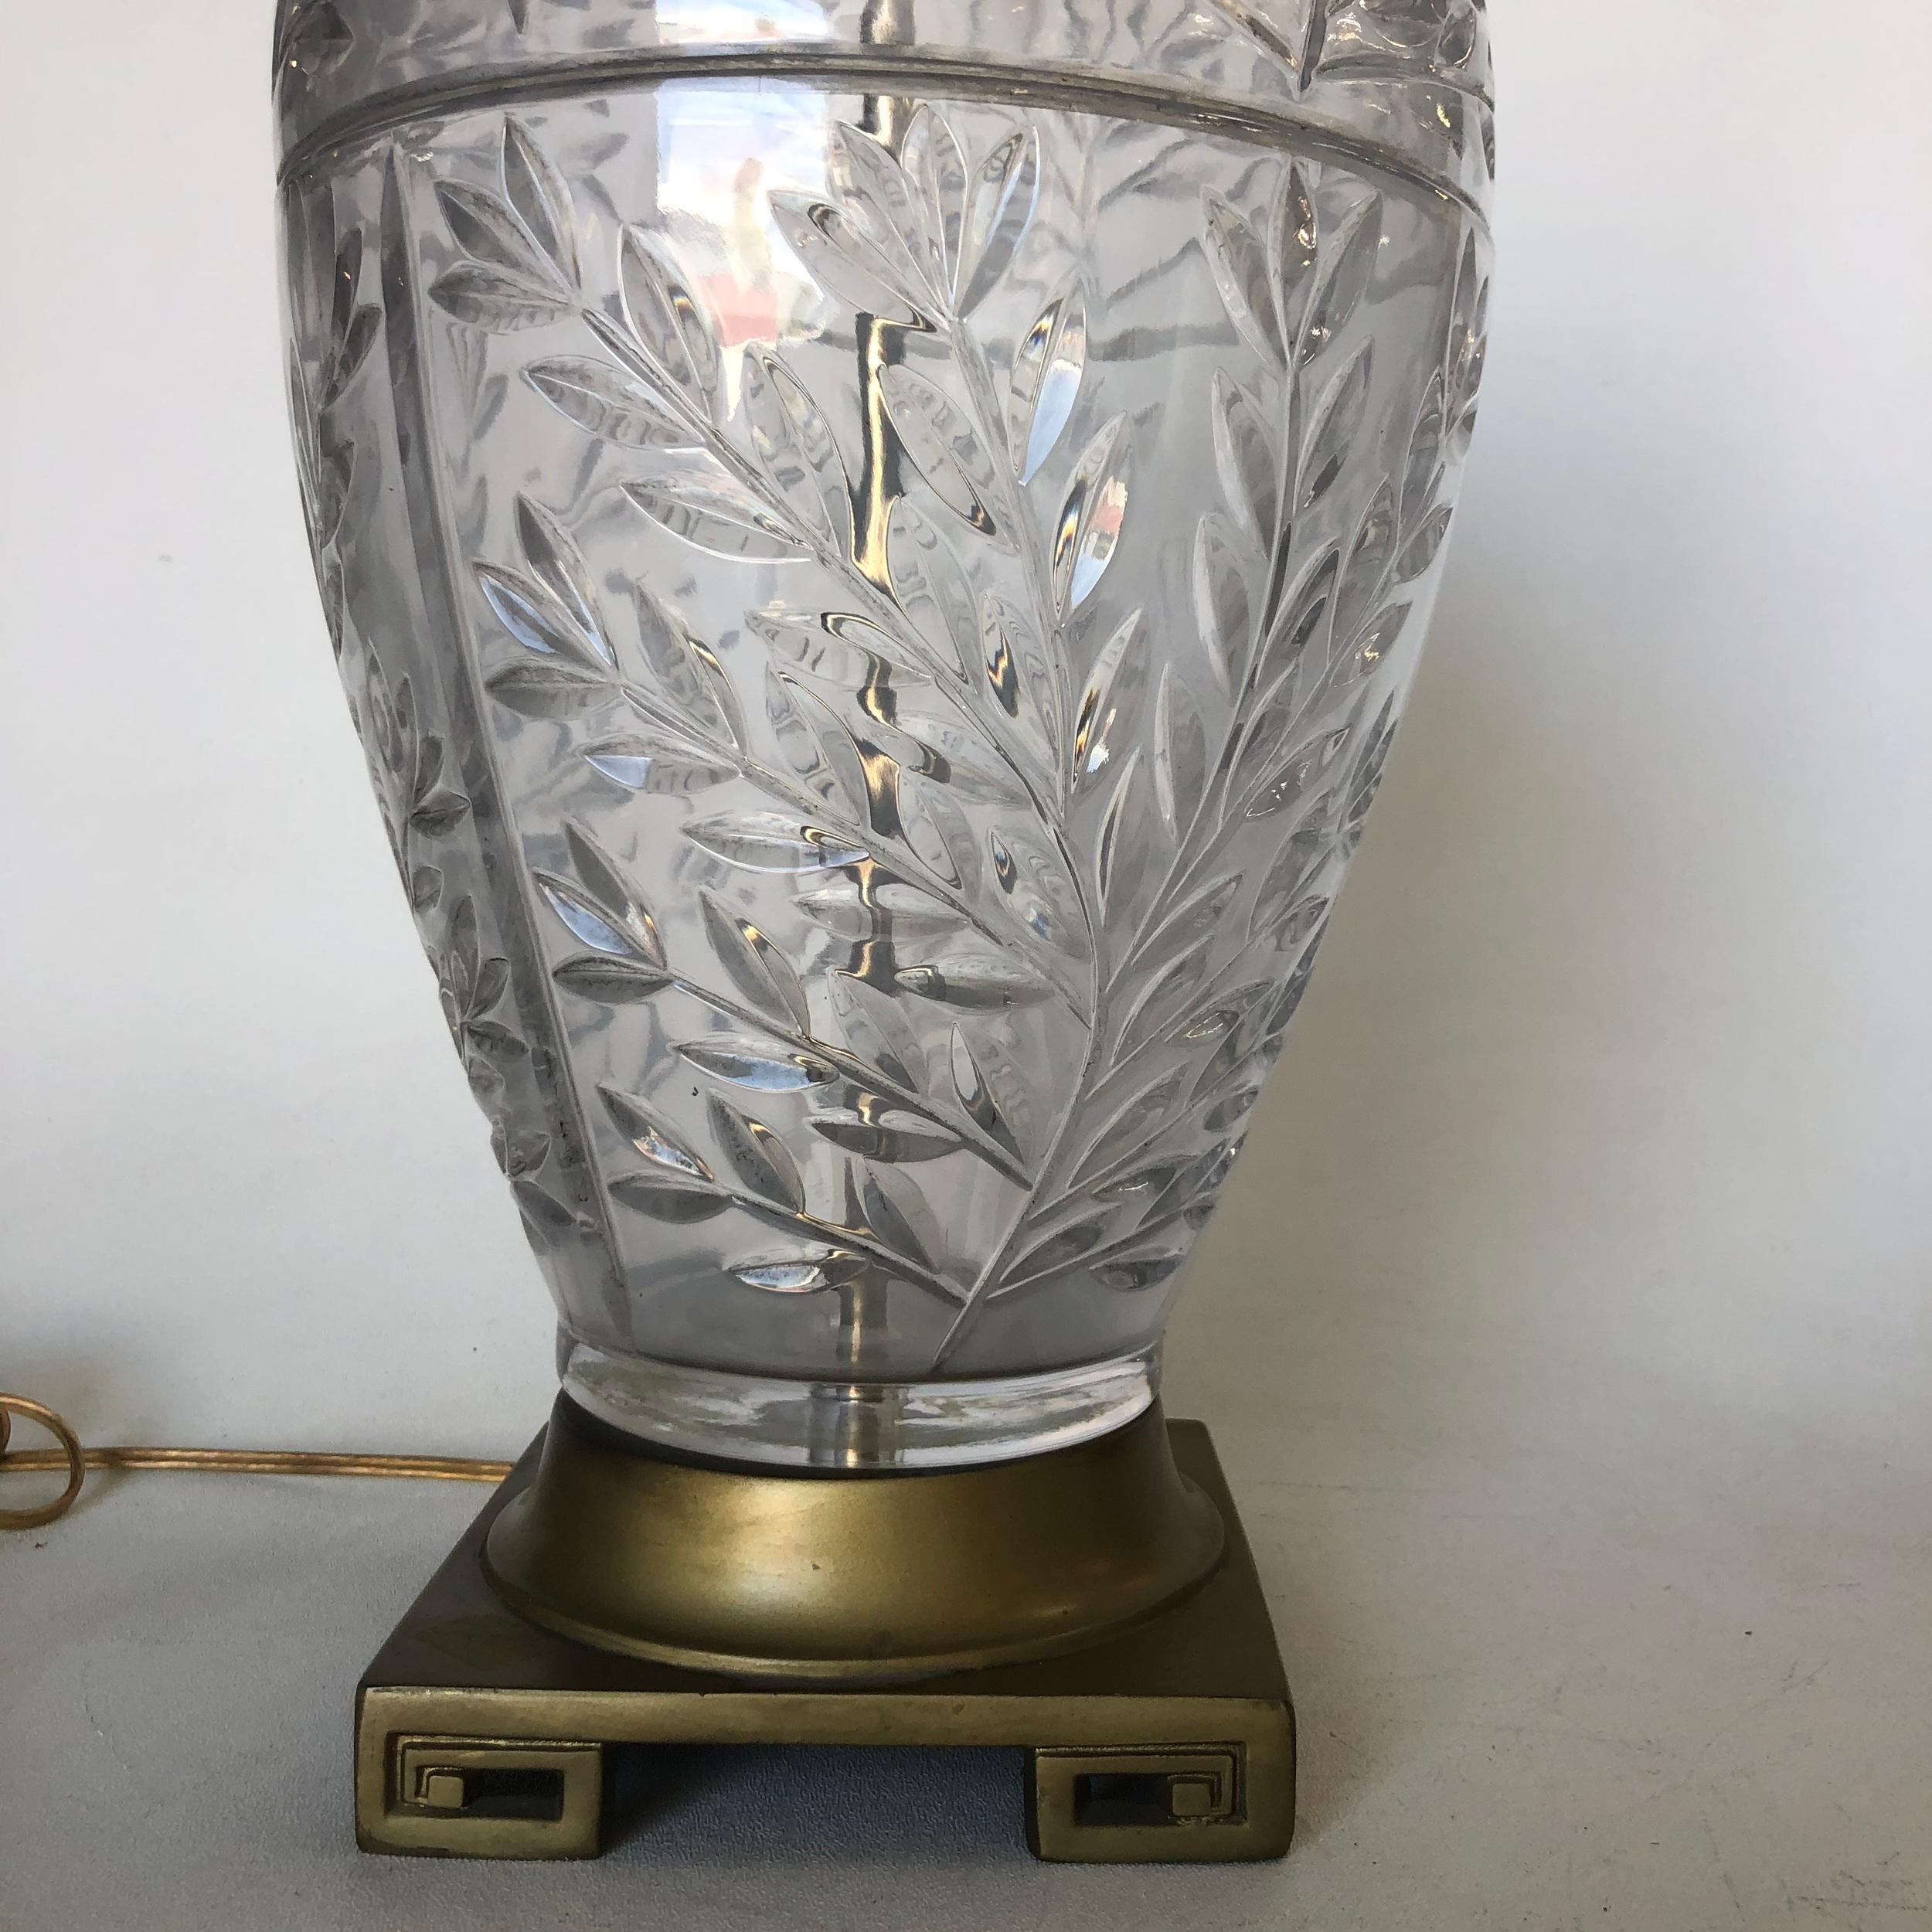 Midcentury leaf motif cut crystal table lamp with brass hardware along the top and bottom.

Measure: 21